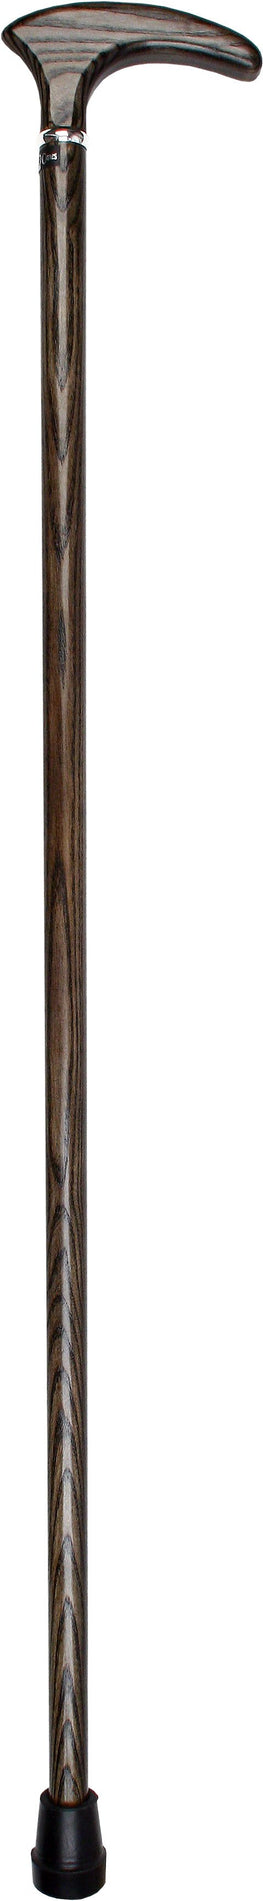 Royal Canes Black Stained Cosmopolitan Walking Cane With Beechwood Shaft and Silver Collar